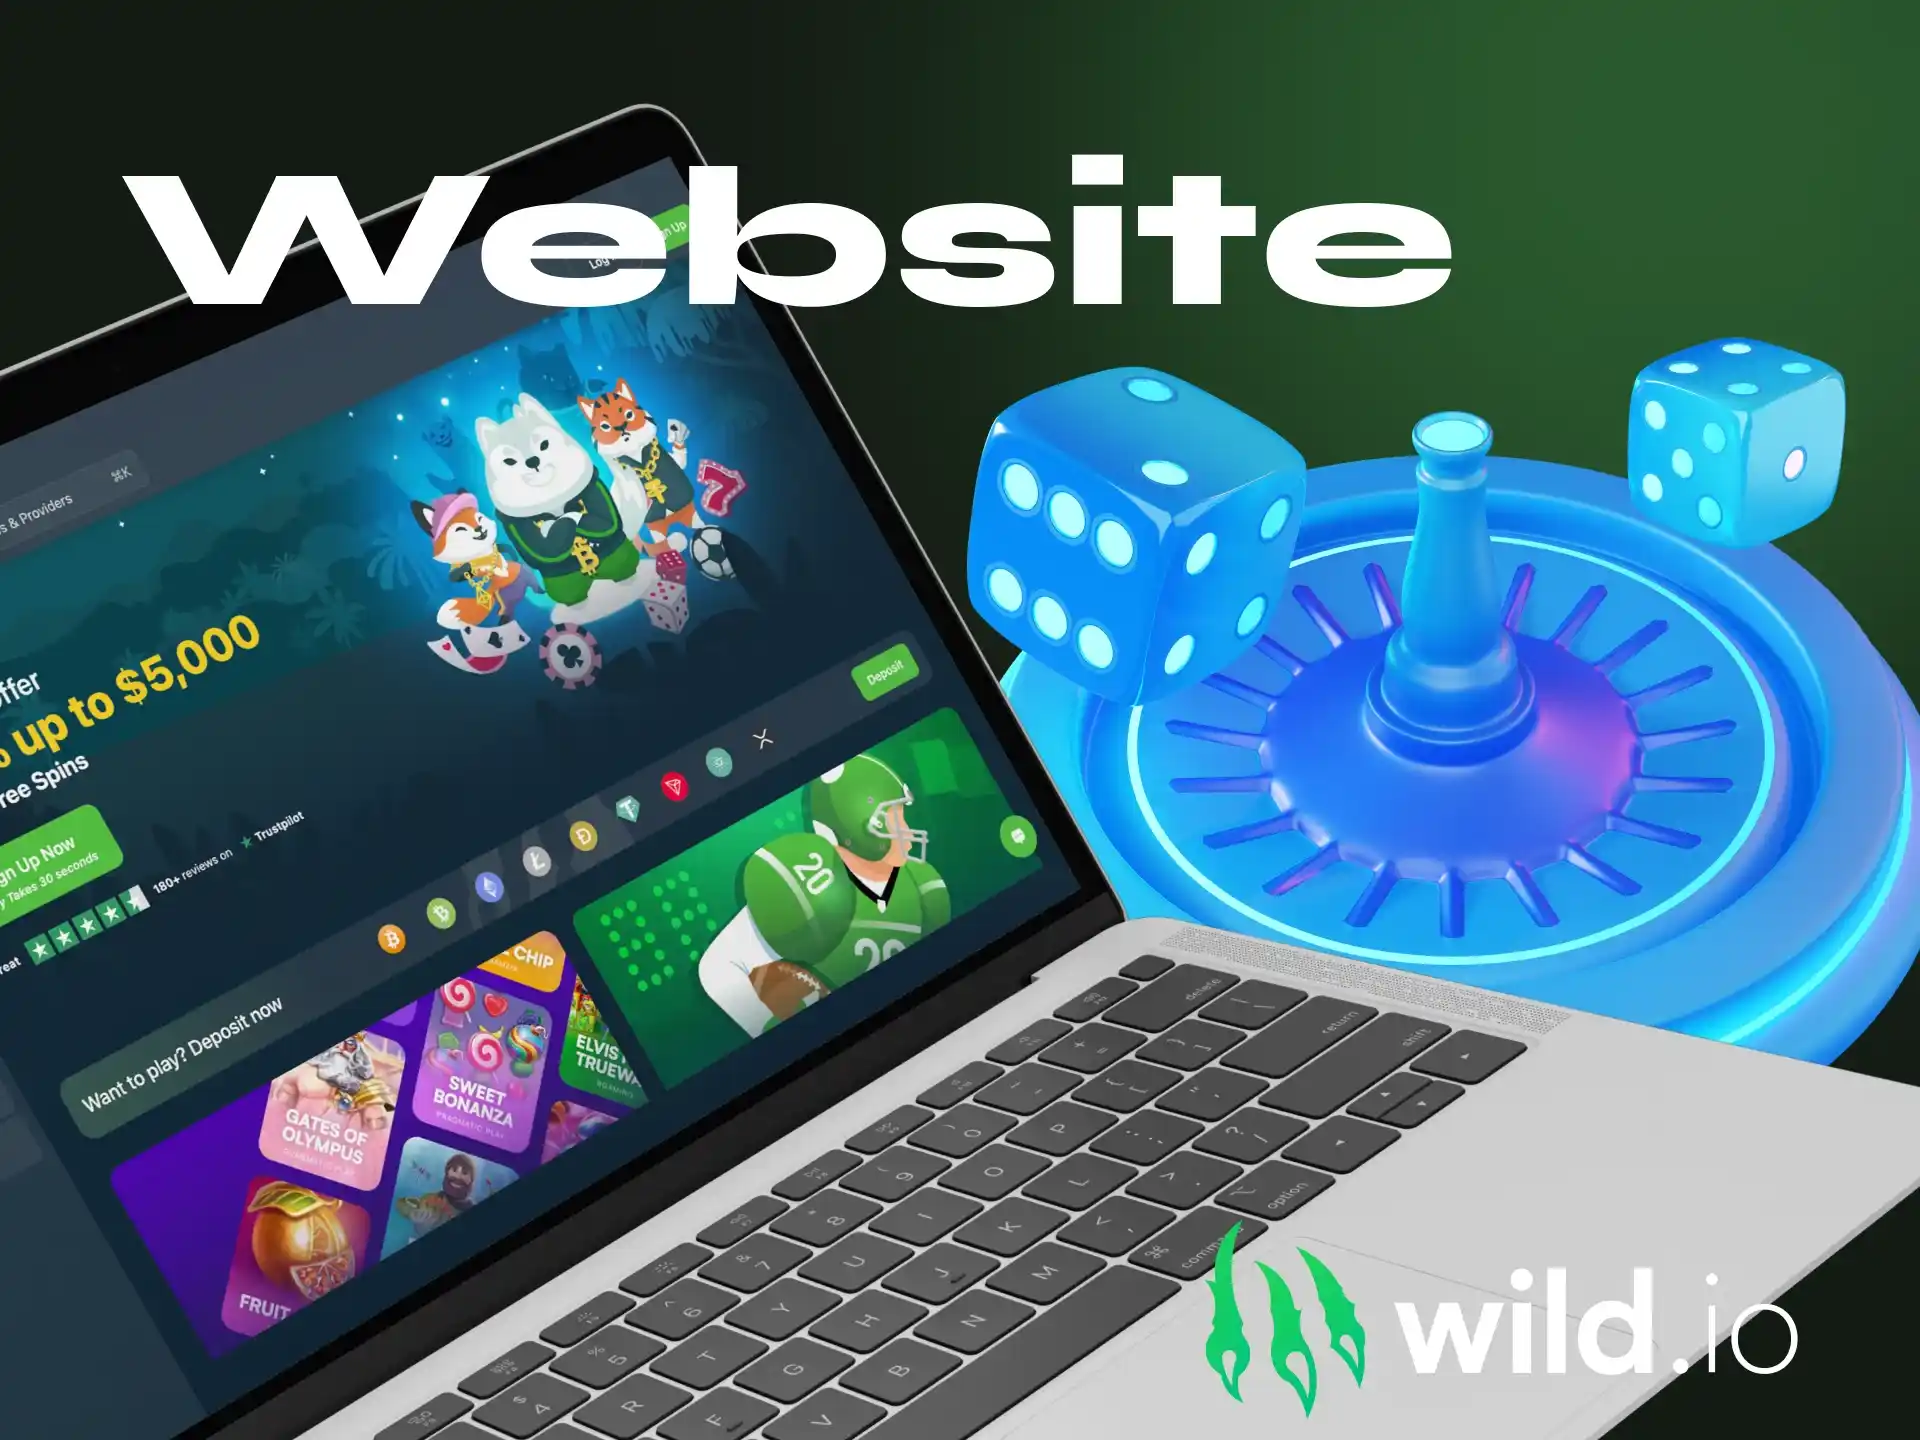 What the interface looks like on the Wildio online casino website.